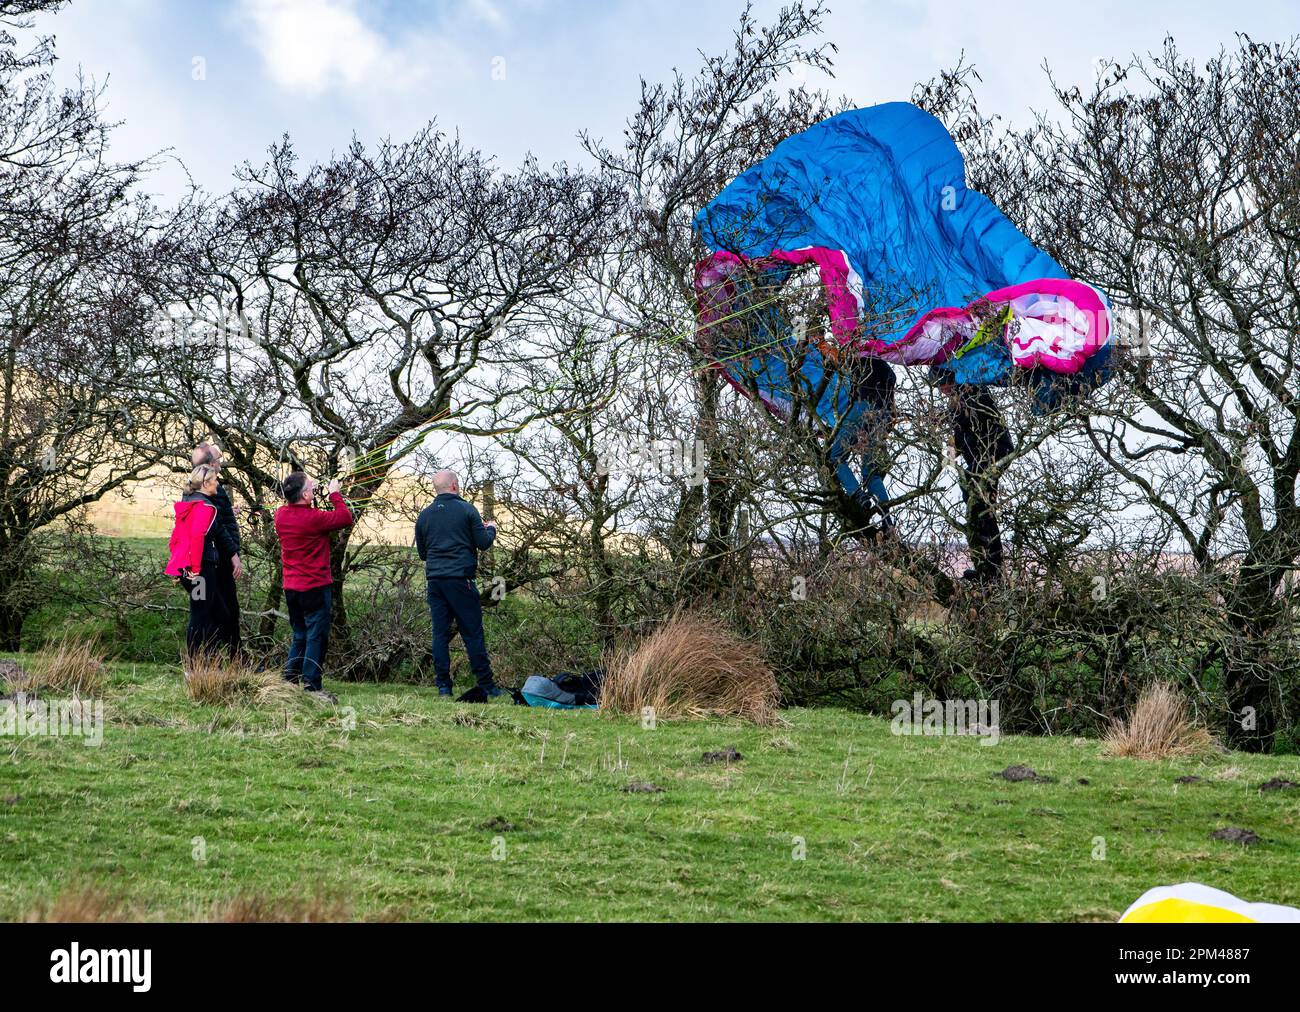 A paraglider stuck in a hedge, Parlick Fell, Preston, Lancashire, UK. Stock Photo